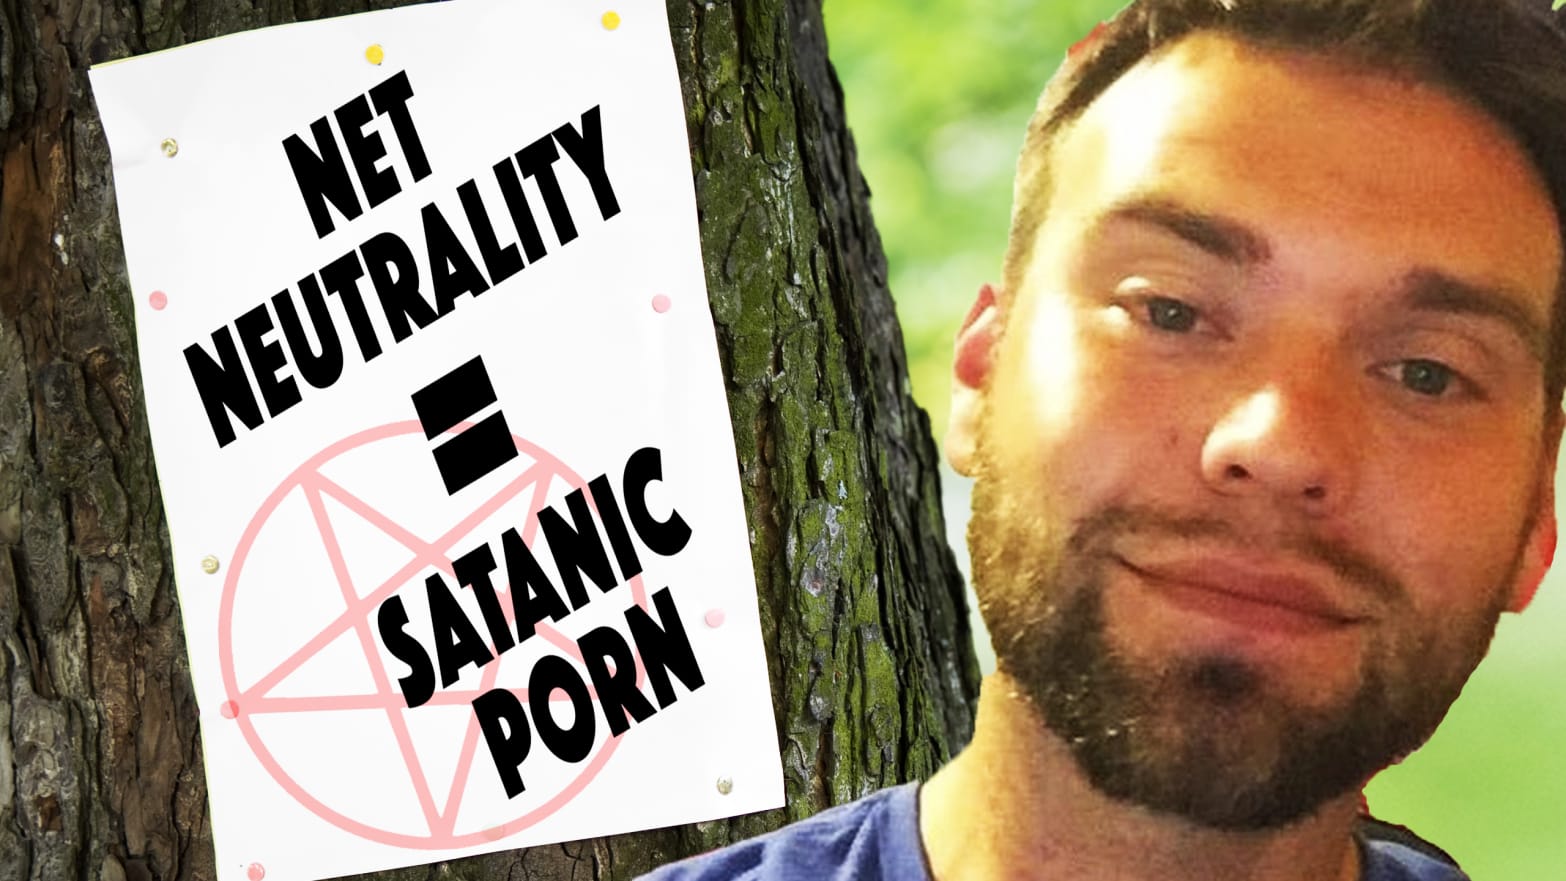 Anet Porn - Alt-Right Claims Net Neutrality Promotes 'Satanic Porn' in ...